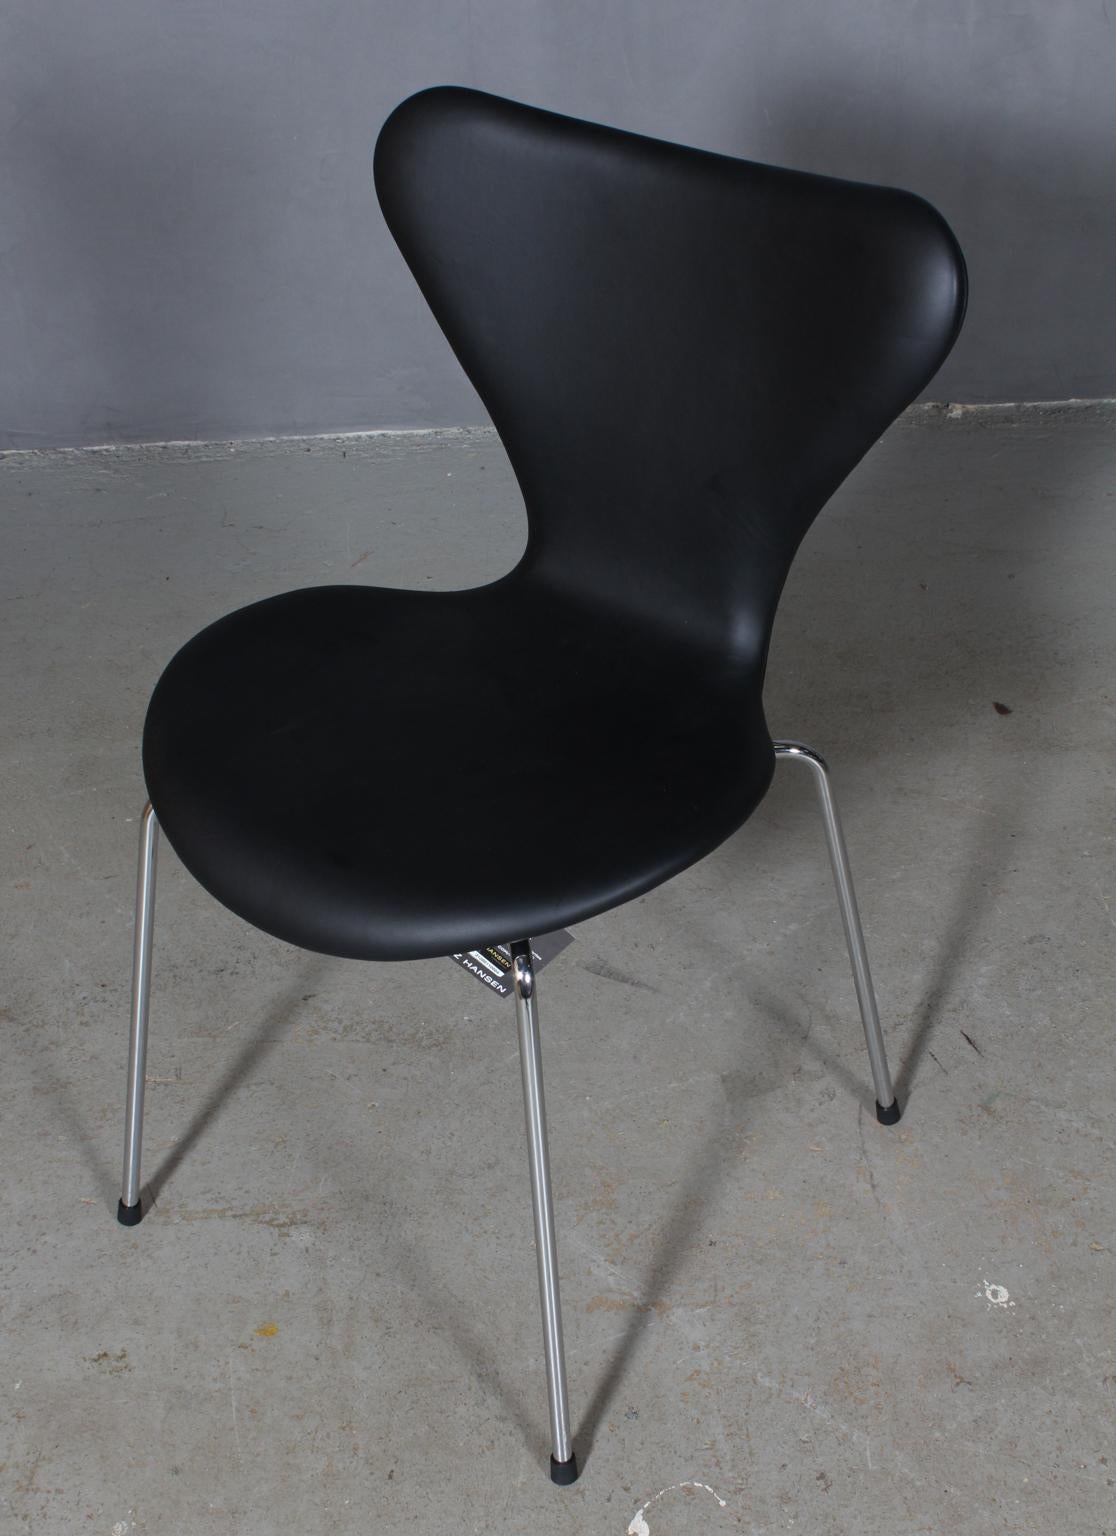 Arne Jacobsen dining chair new upholstered with vintage tan aniline leather.

Base of chrome steel tube.

Model 3107 Syveren, made by Fritz Hansen.

New shell and base re-upholstered, with certificate.